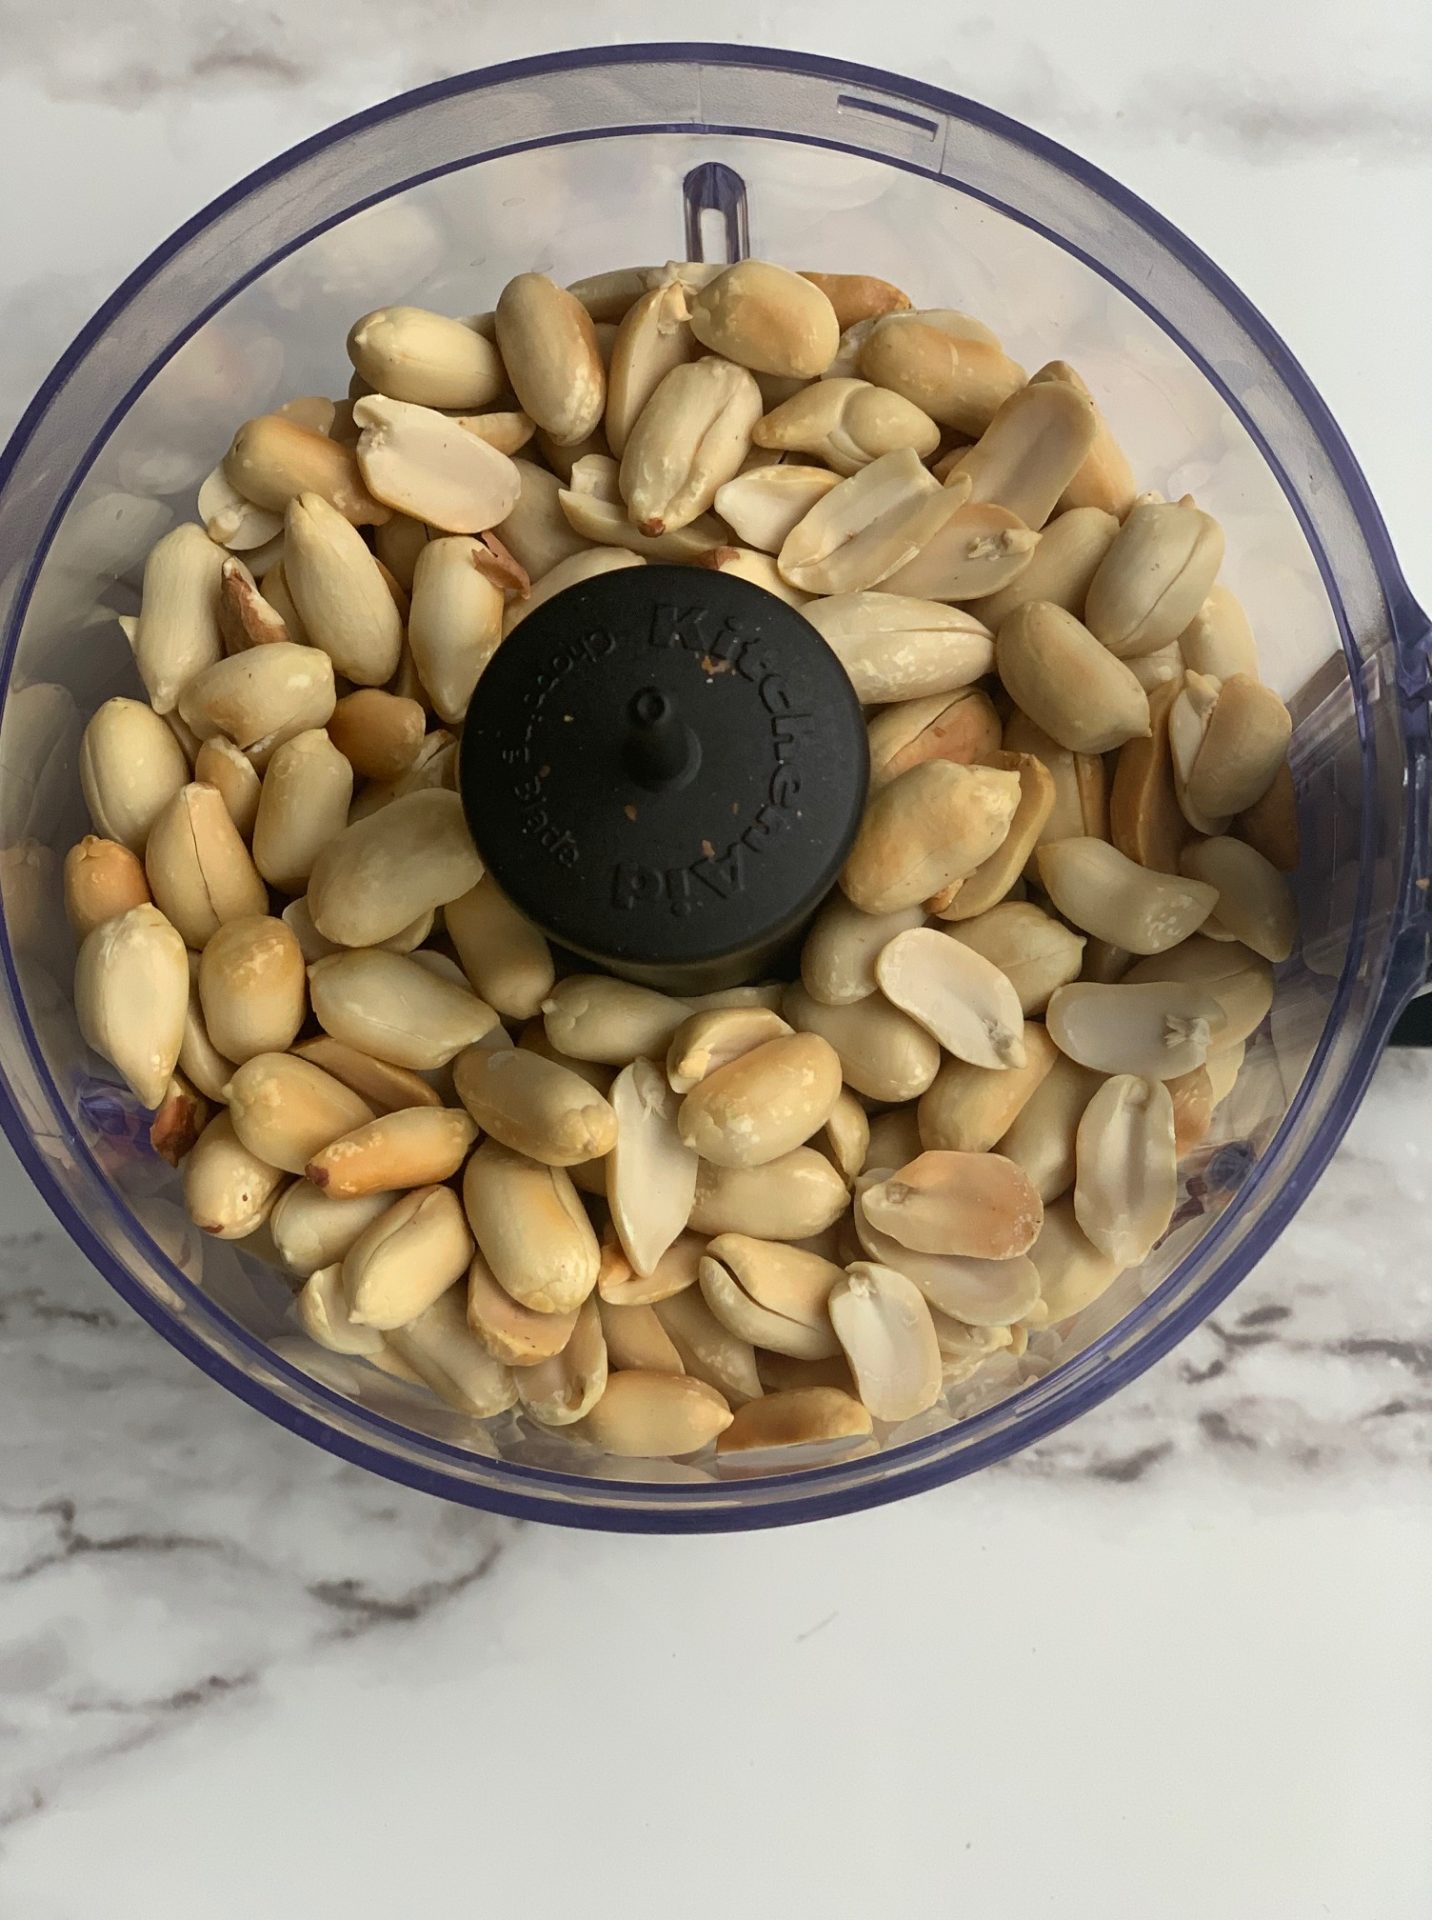 place roasted unsalted peanuts in food processor